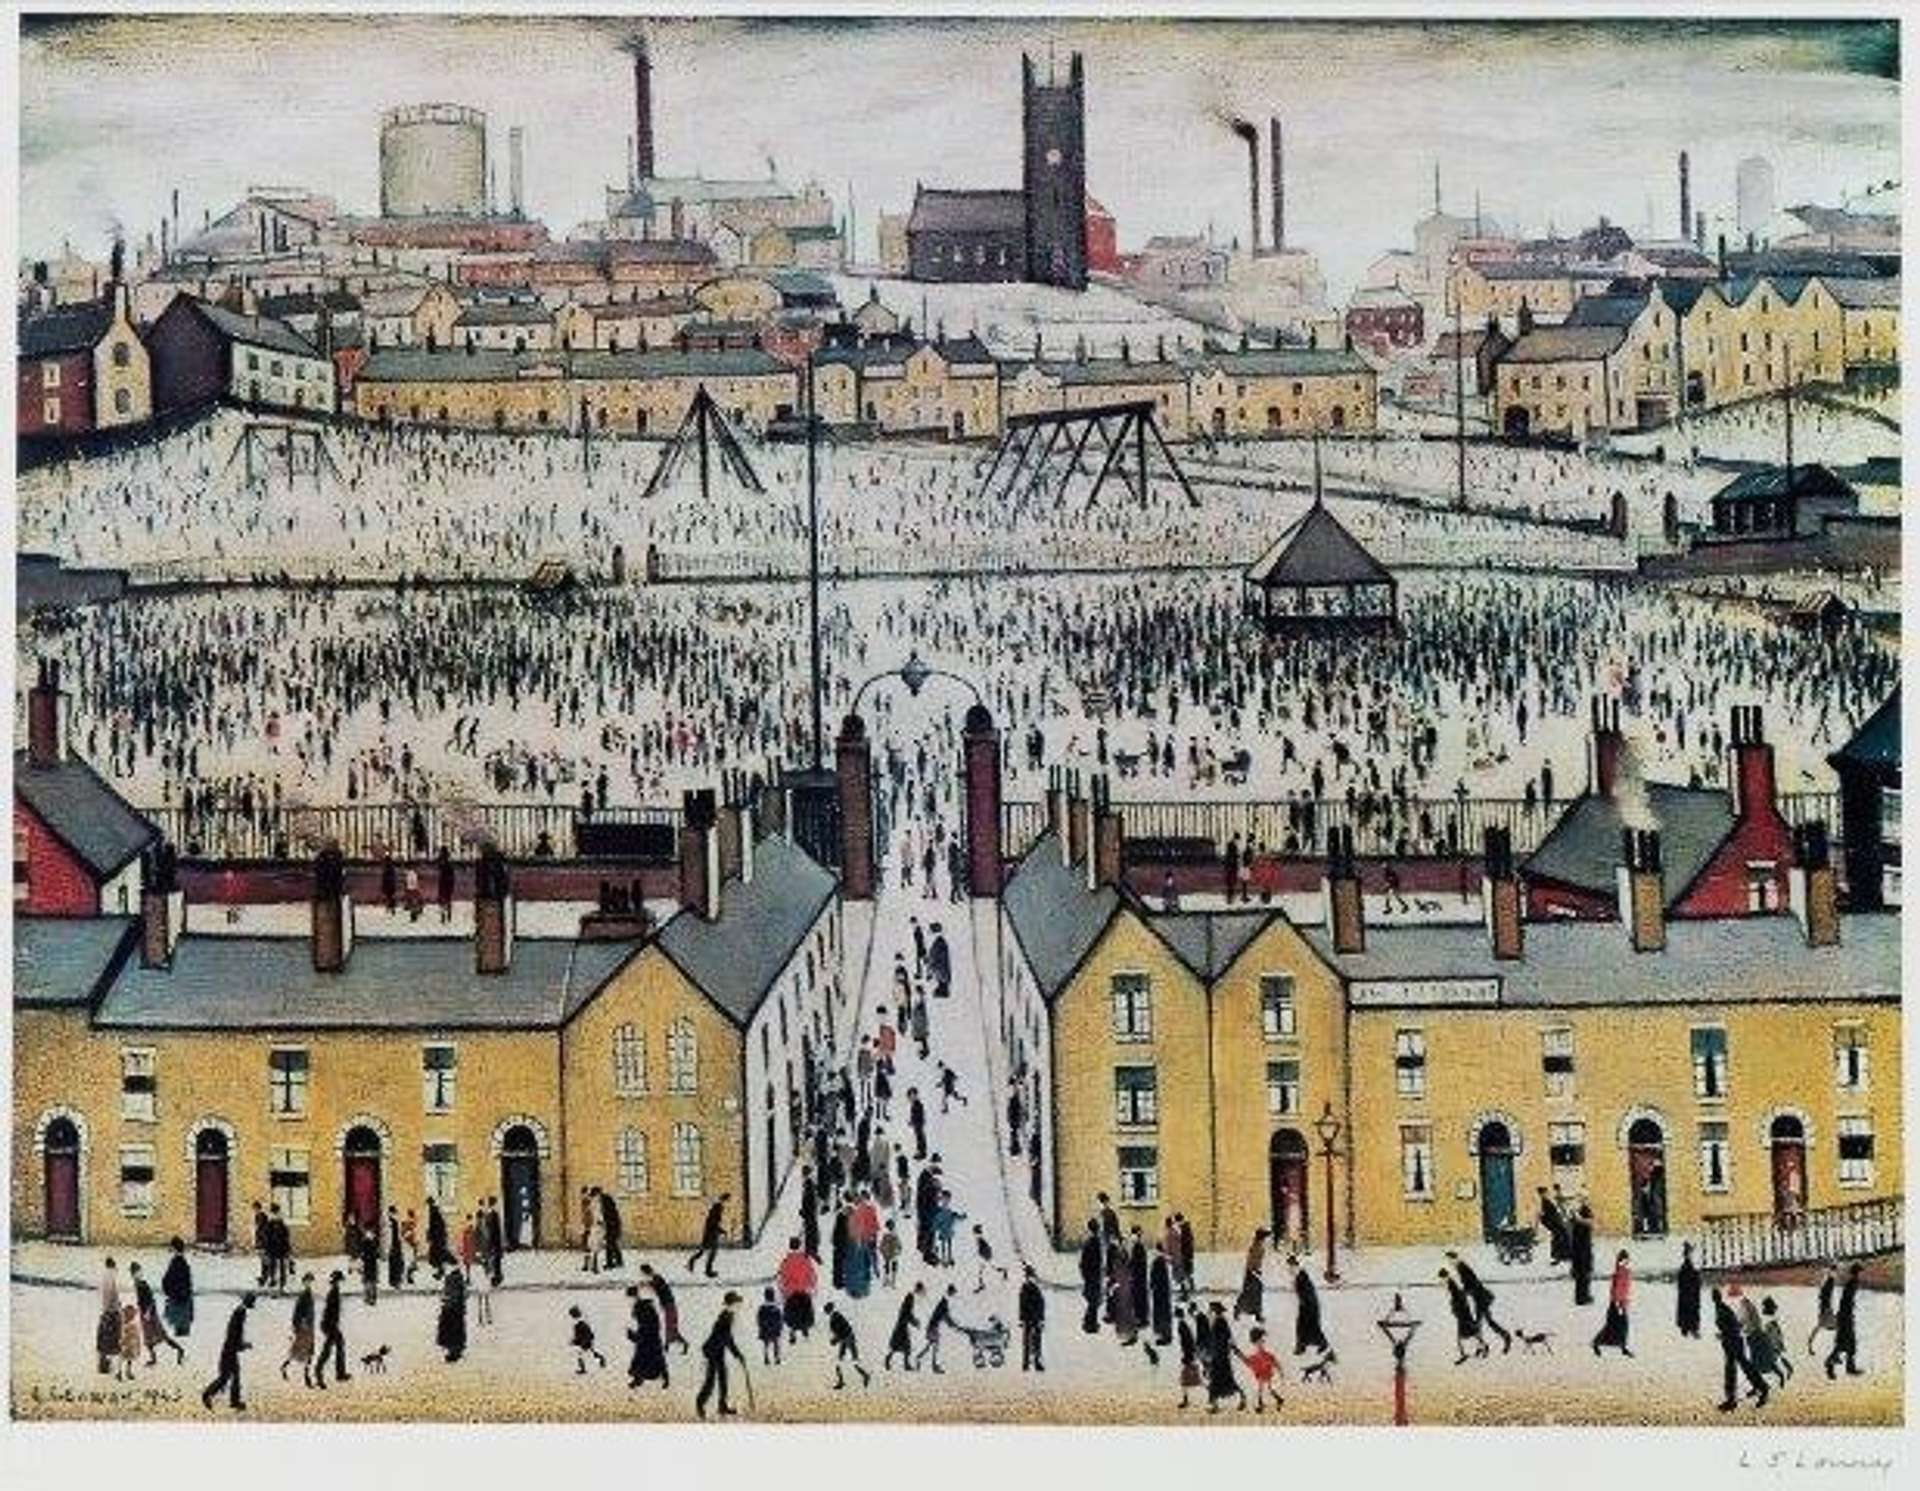 Britain At Play by L S Lowry